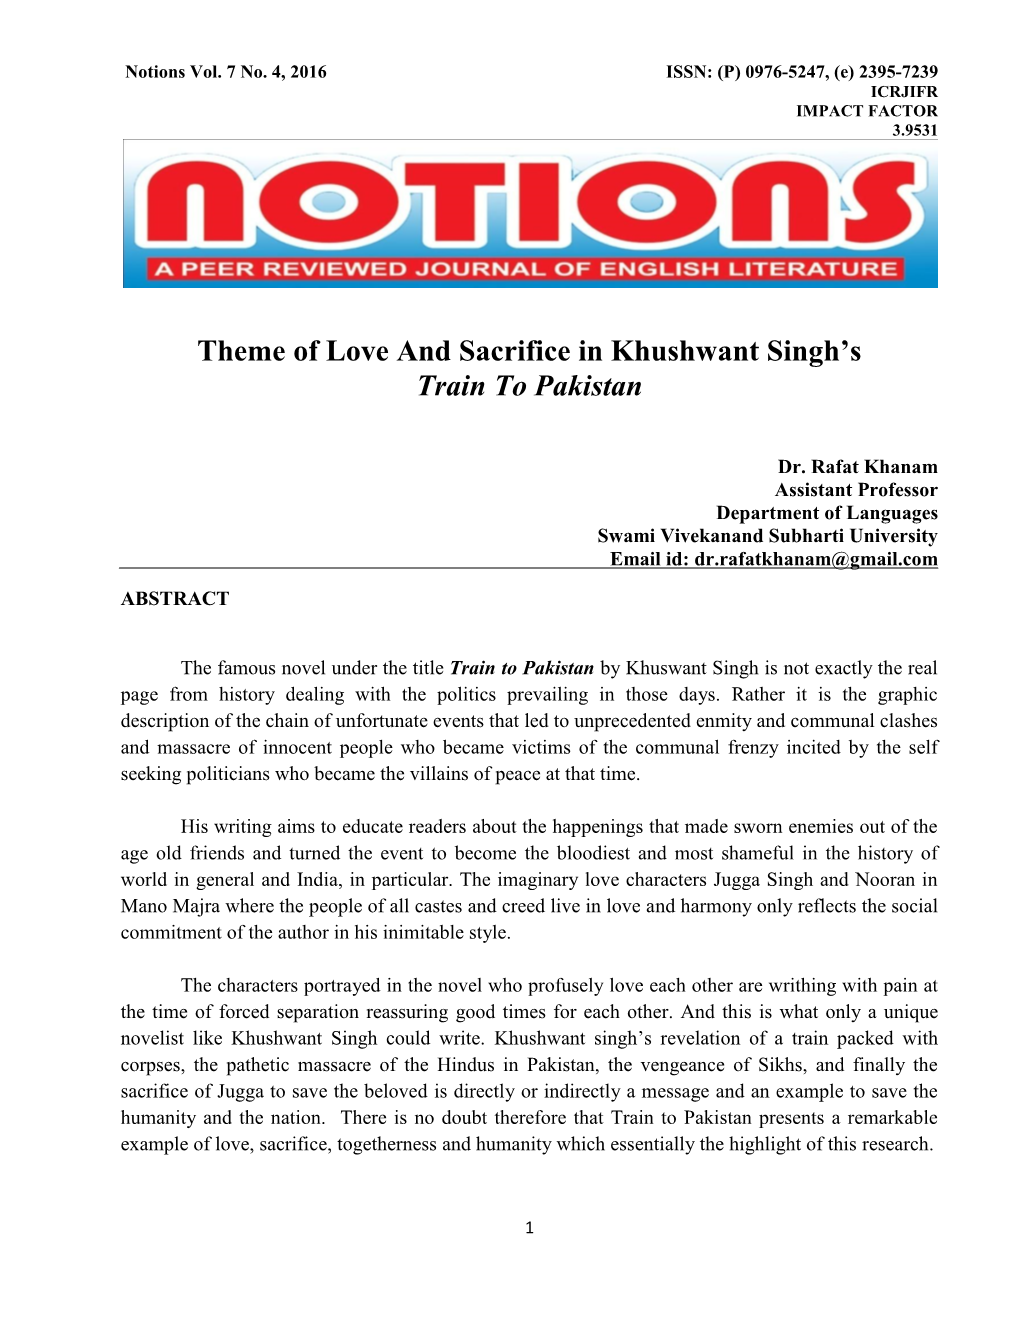 Theme of Love and Sacrifice in Khushwant Singh's Train to Pakistan